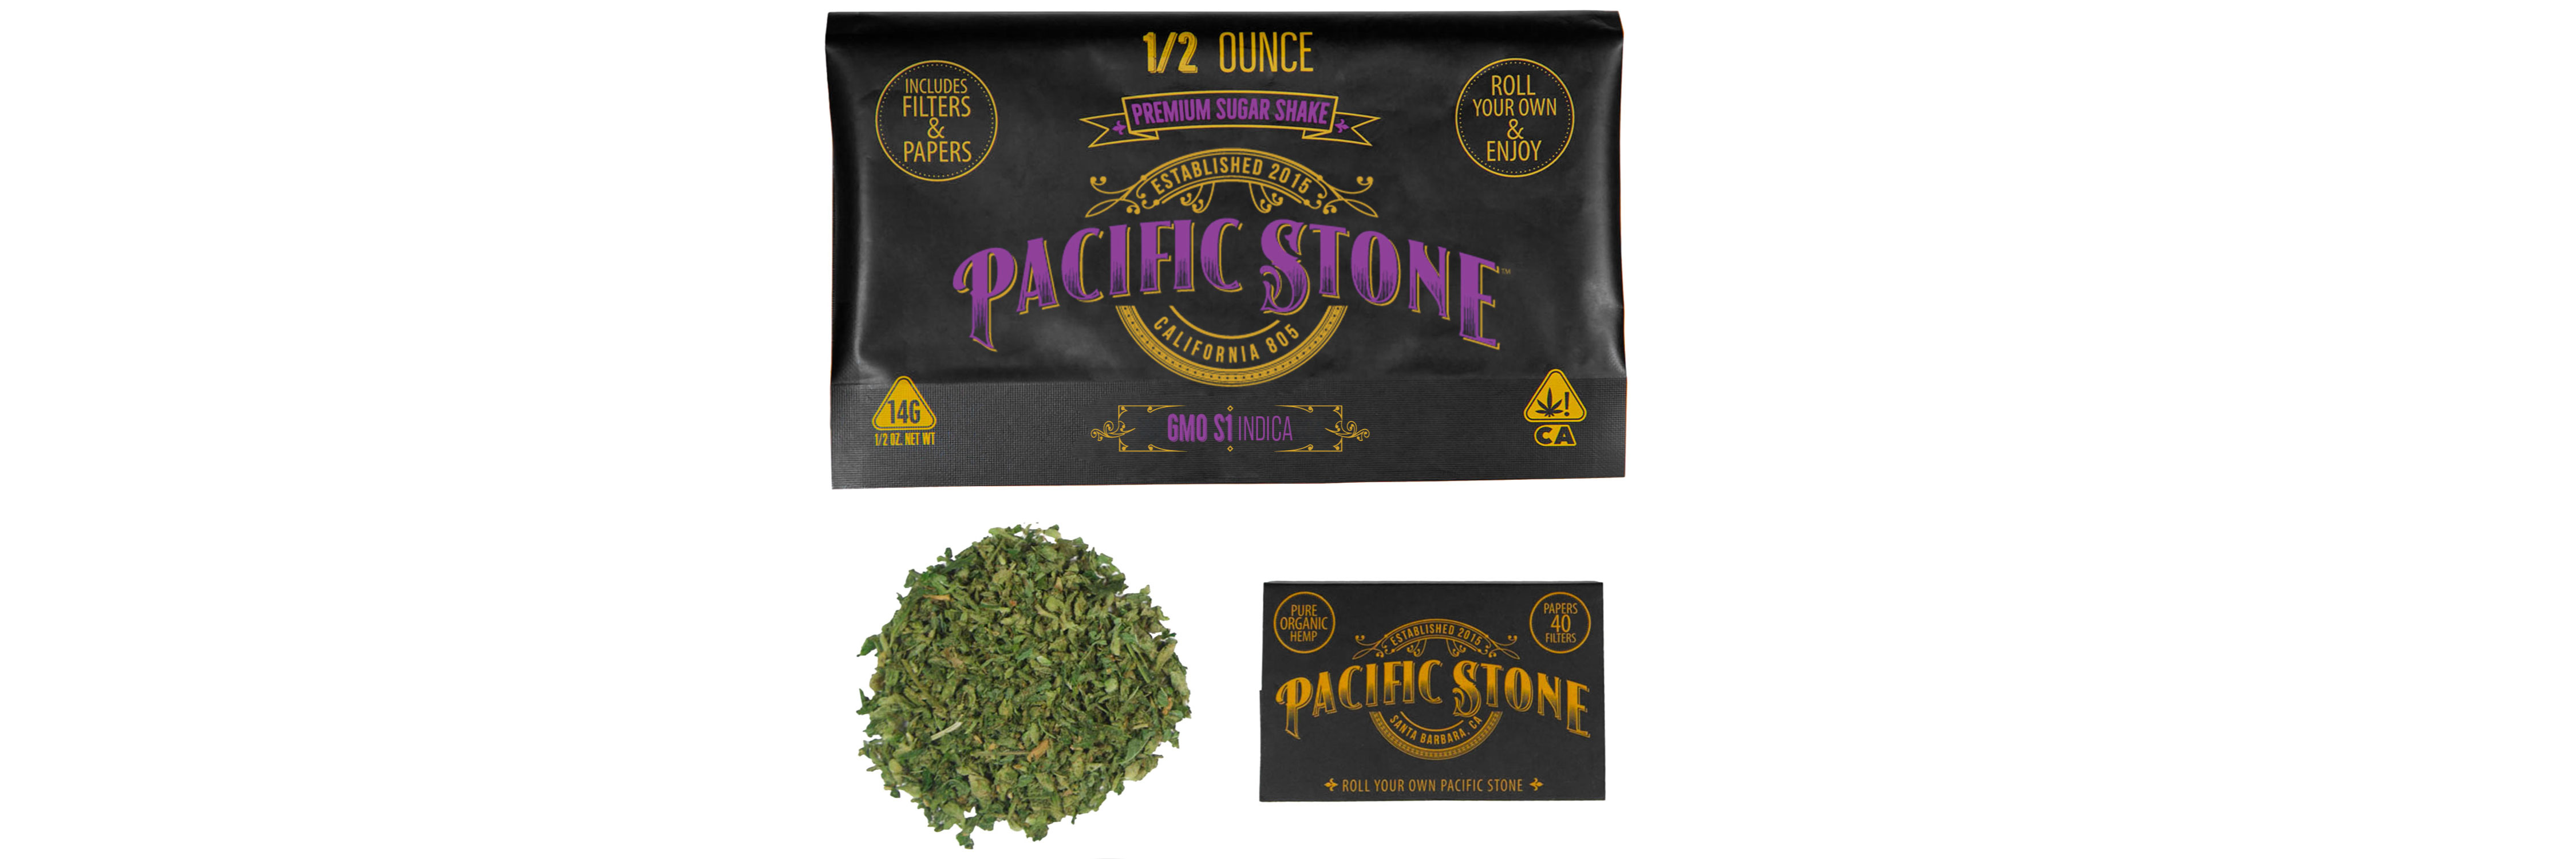 A photograph of Pacific Stone Roll Your Own Sugar Shake 14.0g Pouch Indica GMO